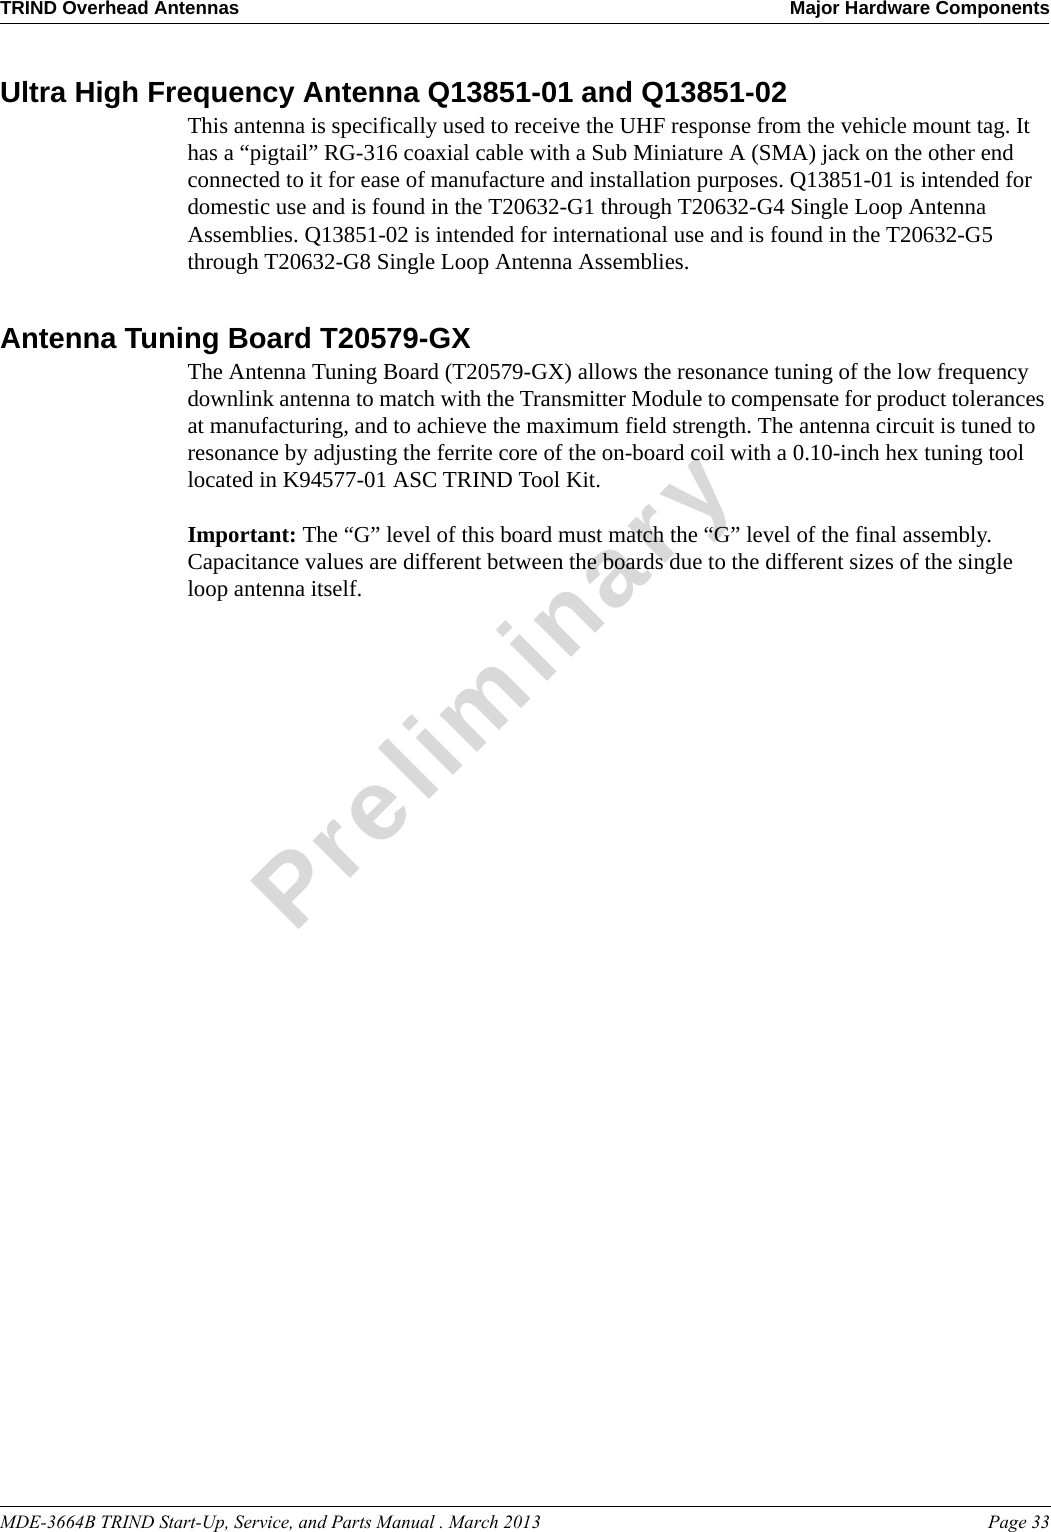 MDE-3664B TRIND Start-Up, Service, and Parts Manual . March 2013 Page 33TRIND Overhead Antennas Major Hardware ComponentsPreliminaryUltra High Frequency Antenna Q13851-01 and Q13851-02This antenna is specifically used to receive the UHF response from the vehicle mount tag. It has a “pigtail” RG-316 coaxial cable with a Sub Miniature A (SMA) jack on the other end connected to it for ease of manufacture and installation purposes. Q13851-01 is intended for domestic use and is found in the T20632-G1 through T20632-G4 Single Loop Antenna Assemblies. Q13851-02 is intended for international use and is found in the T20632-G5 through T20632-G8 Single Loop Antenna Assemblies.Antenna Tuning Board T20579-GXThe Antenna Tuning Board (T20579-GX) allows the resonance tuning of the low frequency downlink antenna to match with the Transmitter Module to compensate for product tolerances at manufacturing, and to achieve the maximum field strength. The antenna circuit is tuned to resonance by adjusting the ferrite core of the on-board coil with a 0.10-inch hex tuning tool located in K94577-01 ASC TRIND Tool Kit. Important: The “G” level of this board must match the “G” level of the final assembly. Capacitance values are different between the boards due to the different sizes of the single loop antenna itself. 